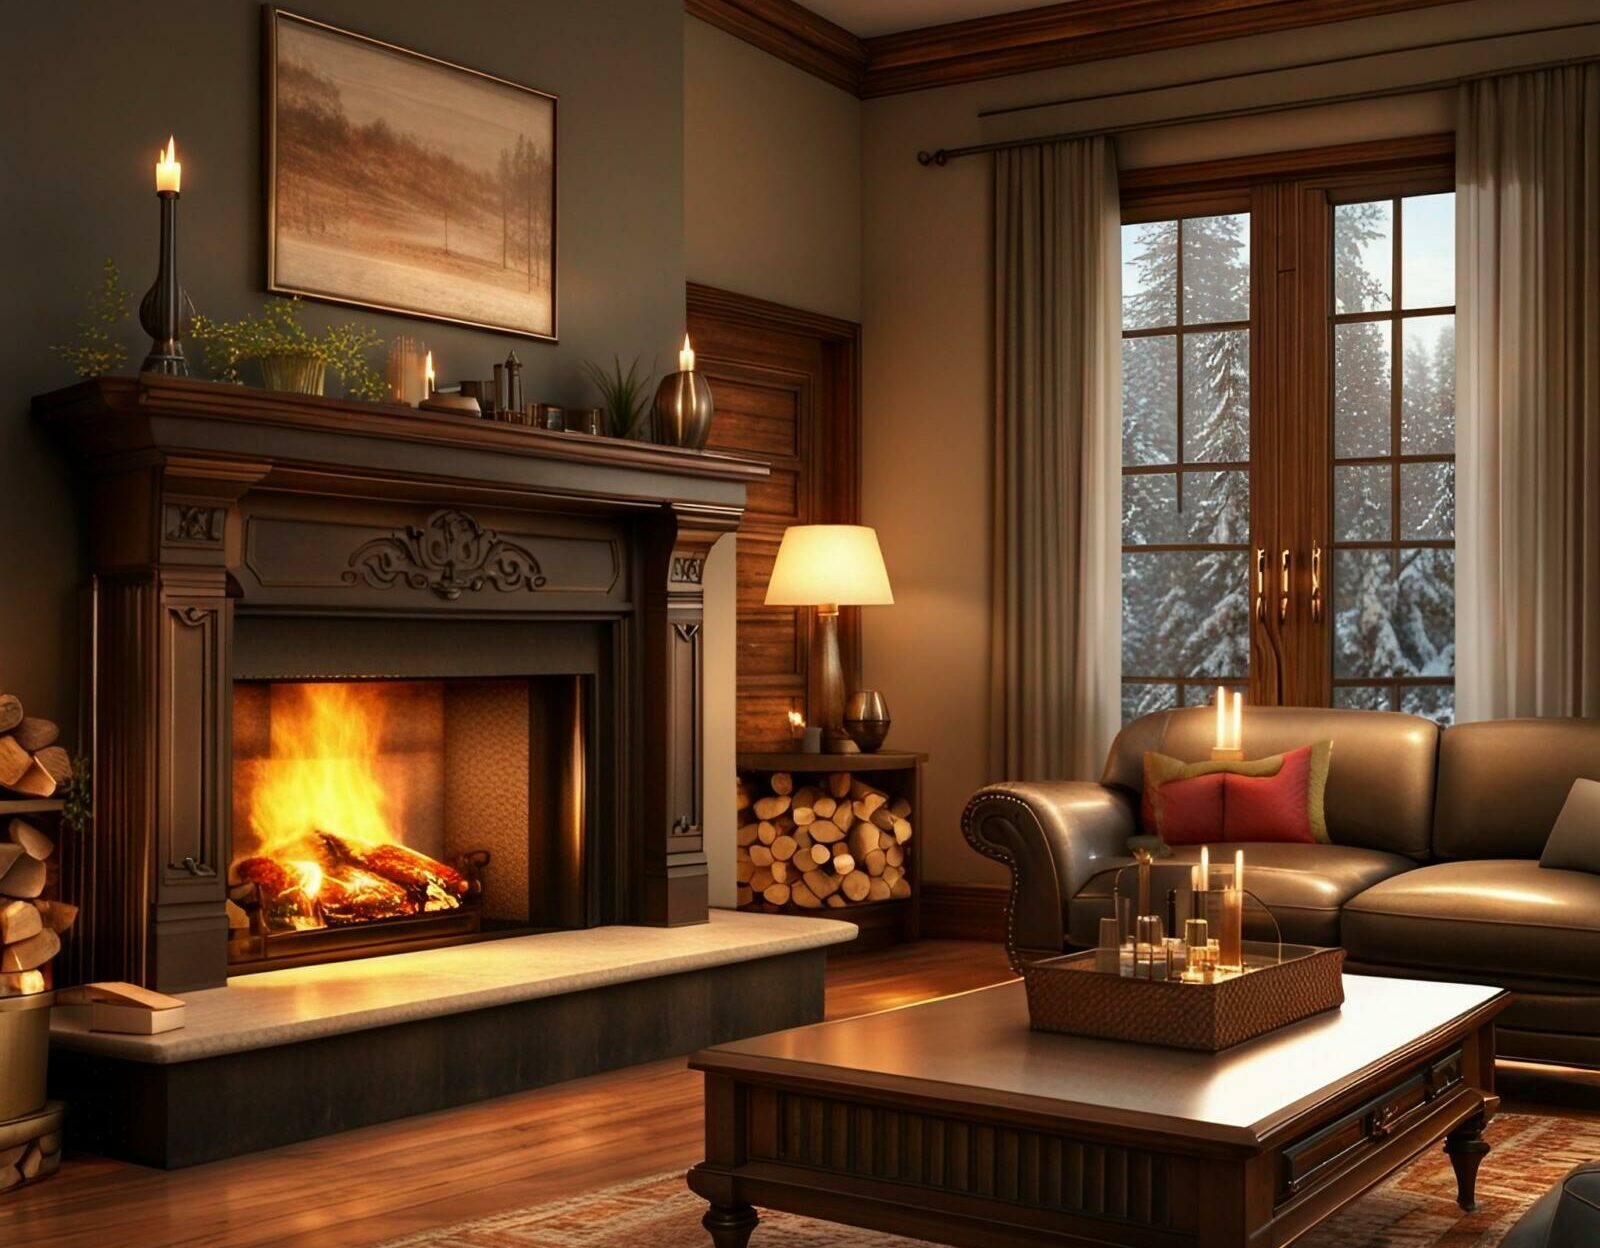 Generate a high-quality, HDR, realistic image of a classic wood-burning fireplace with a roaring fire in a cozy, elegantly decorated living room